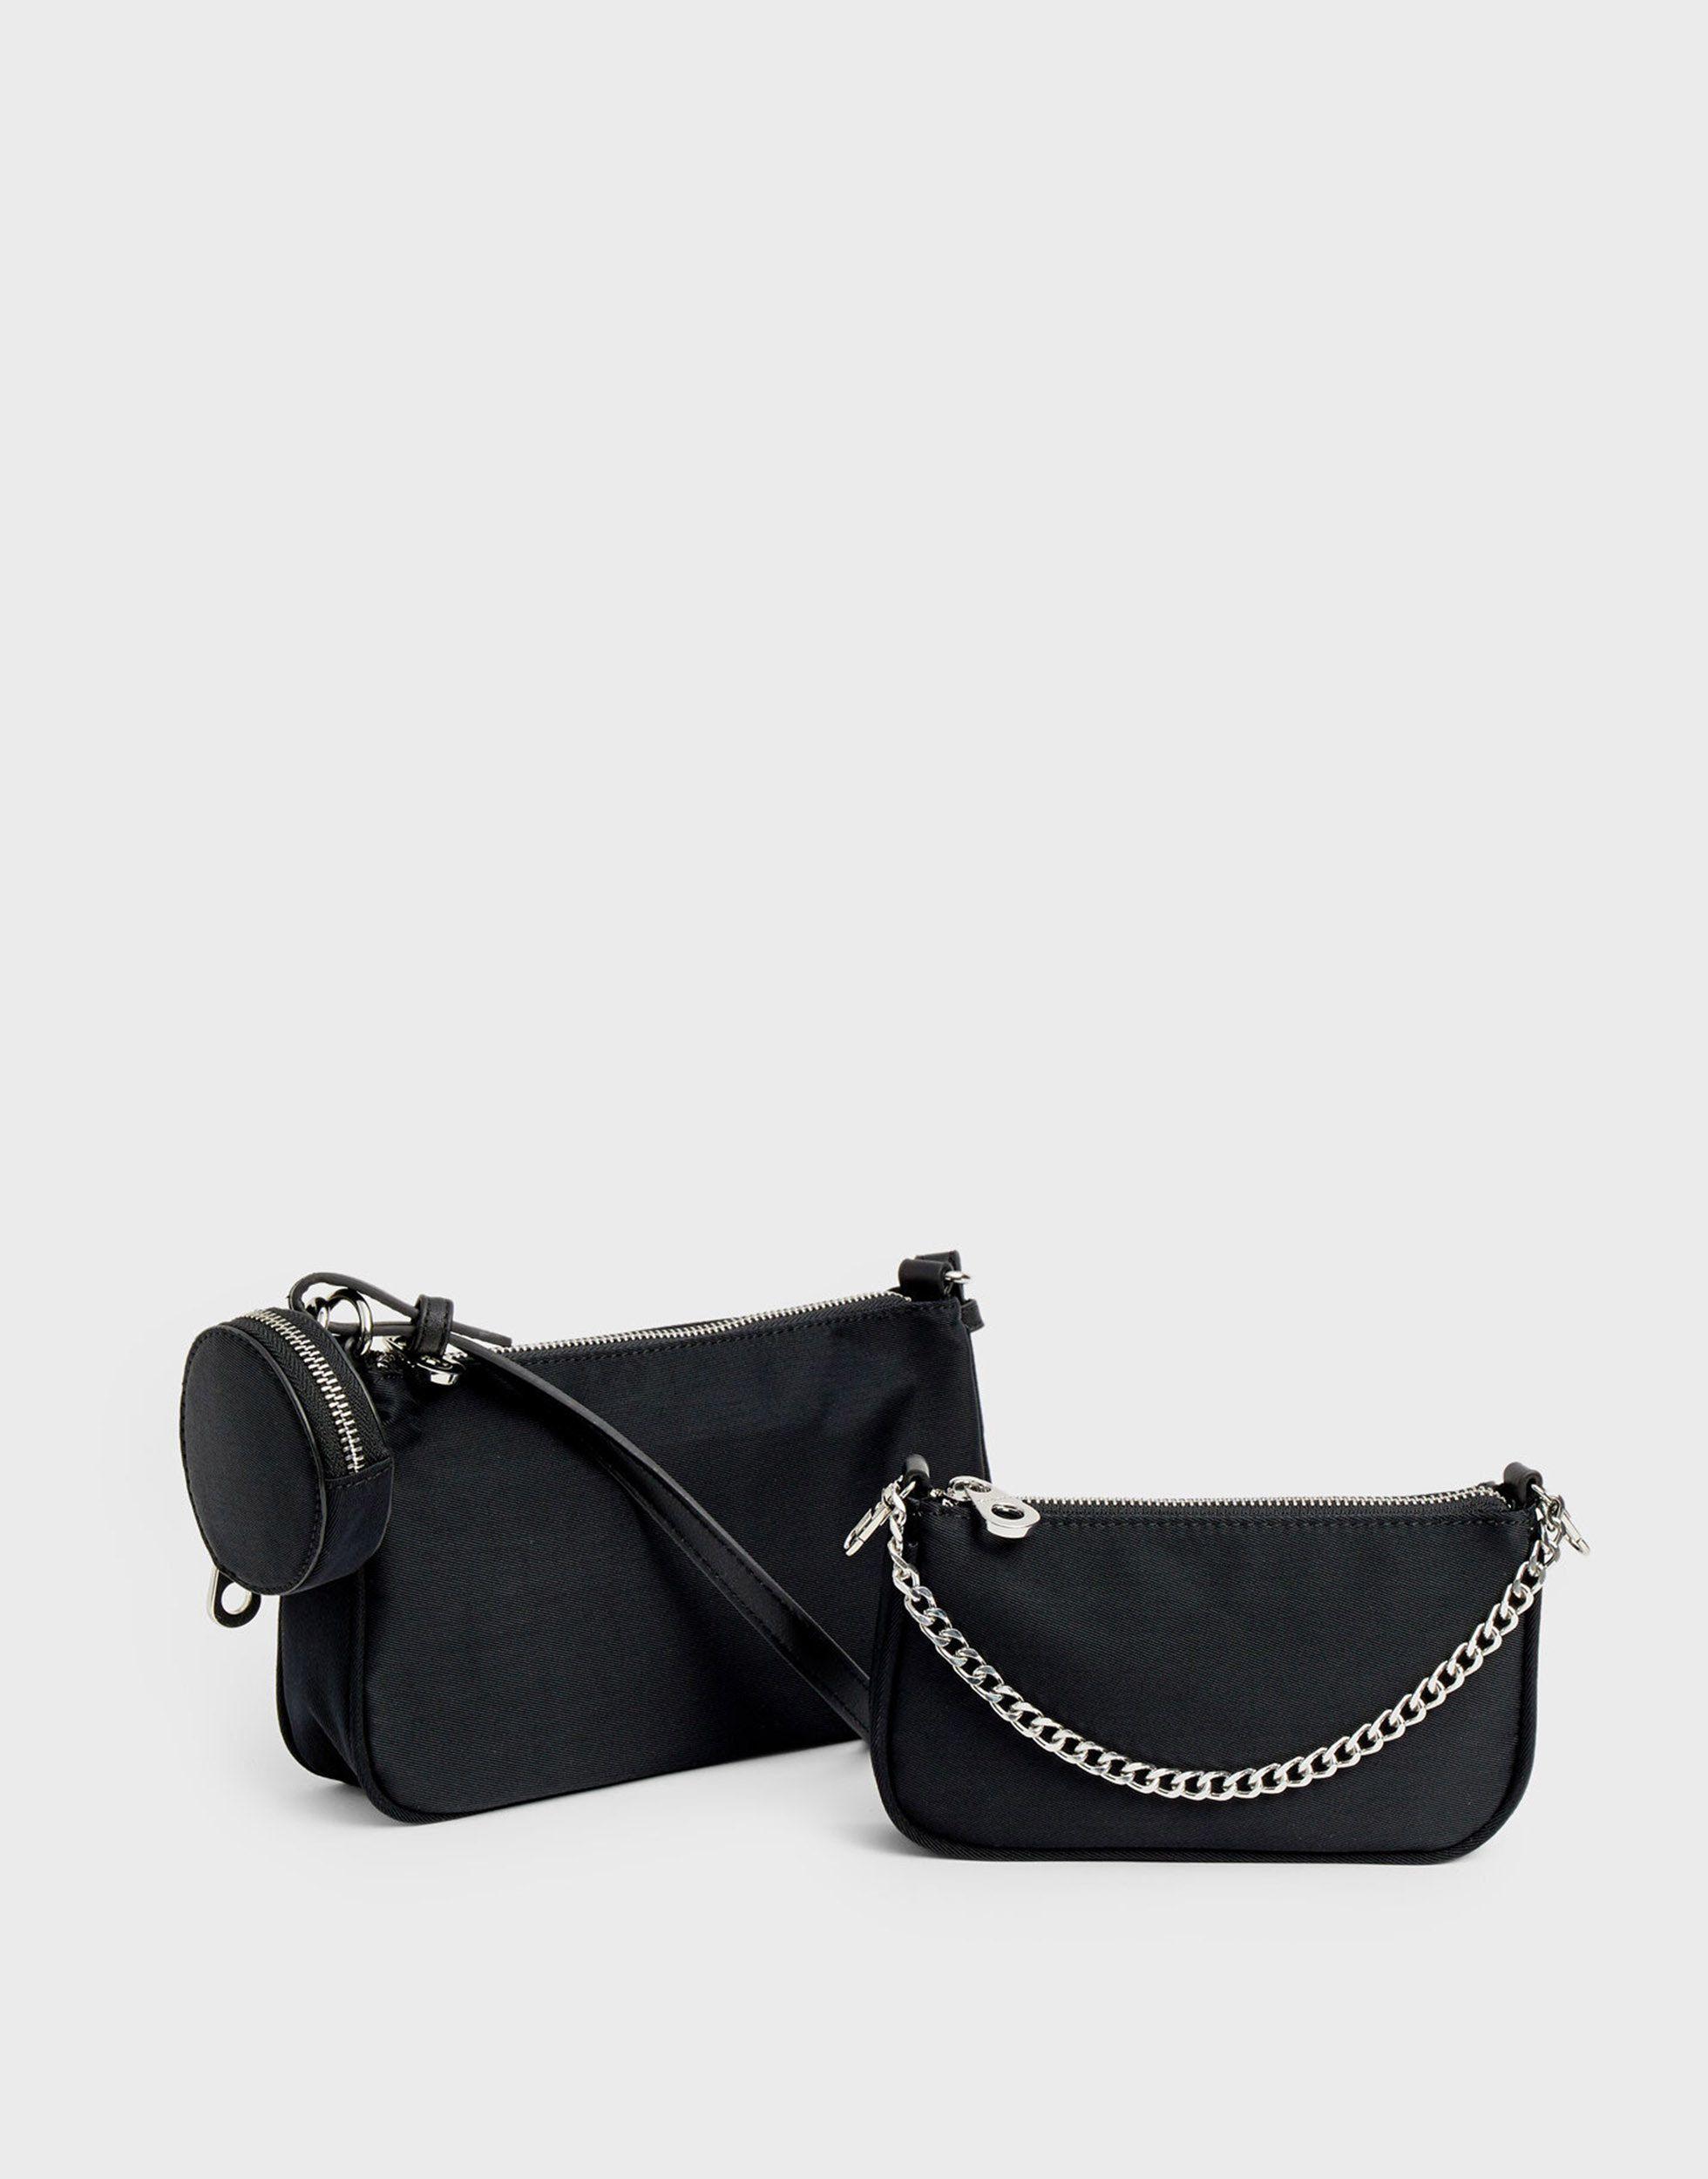 Stradivarius 3 Piece Cross Body Bag With Chain Detail in Black